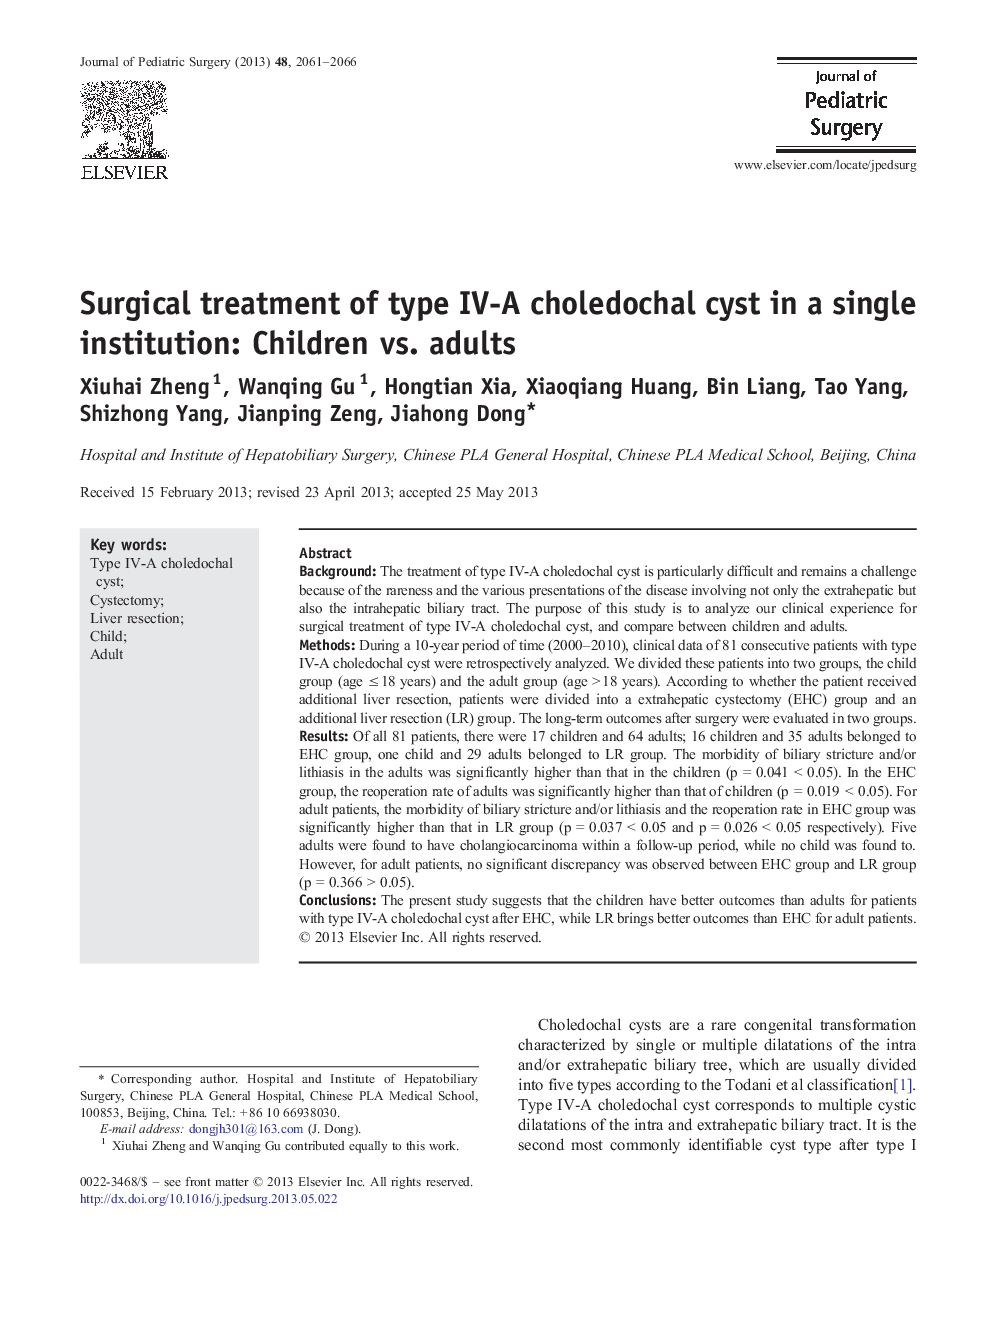 Surgical treatment of type IV-A choledochal cyst in a single institution: Children vs. adults